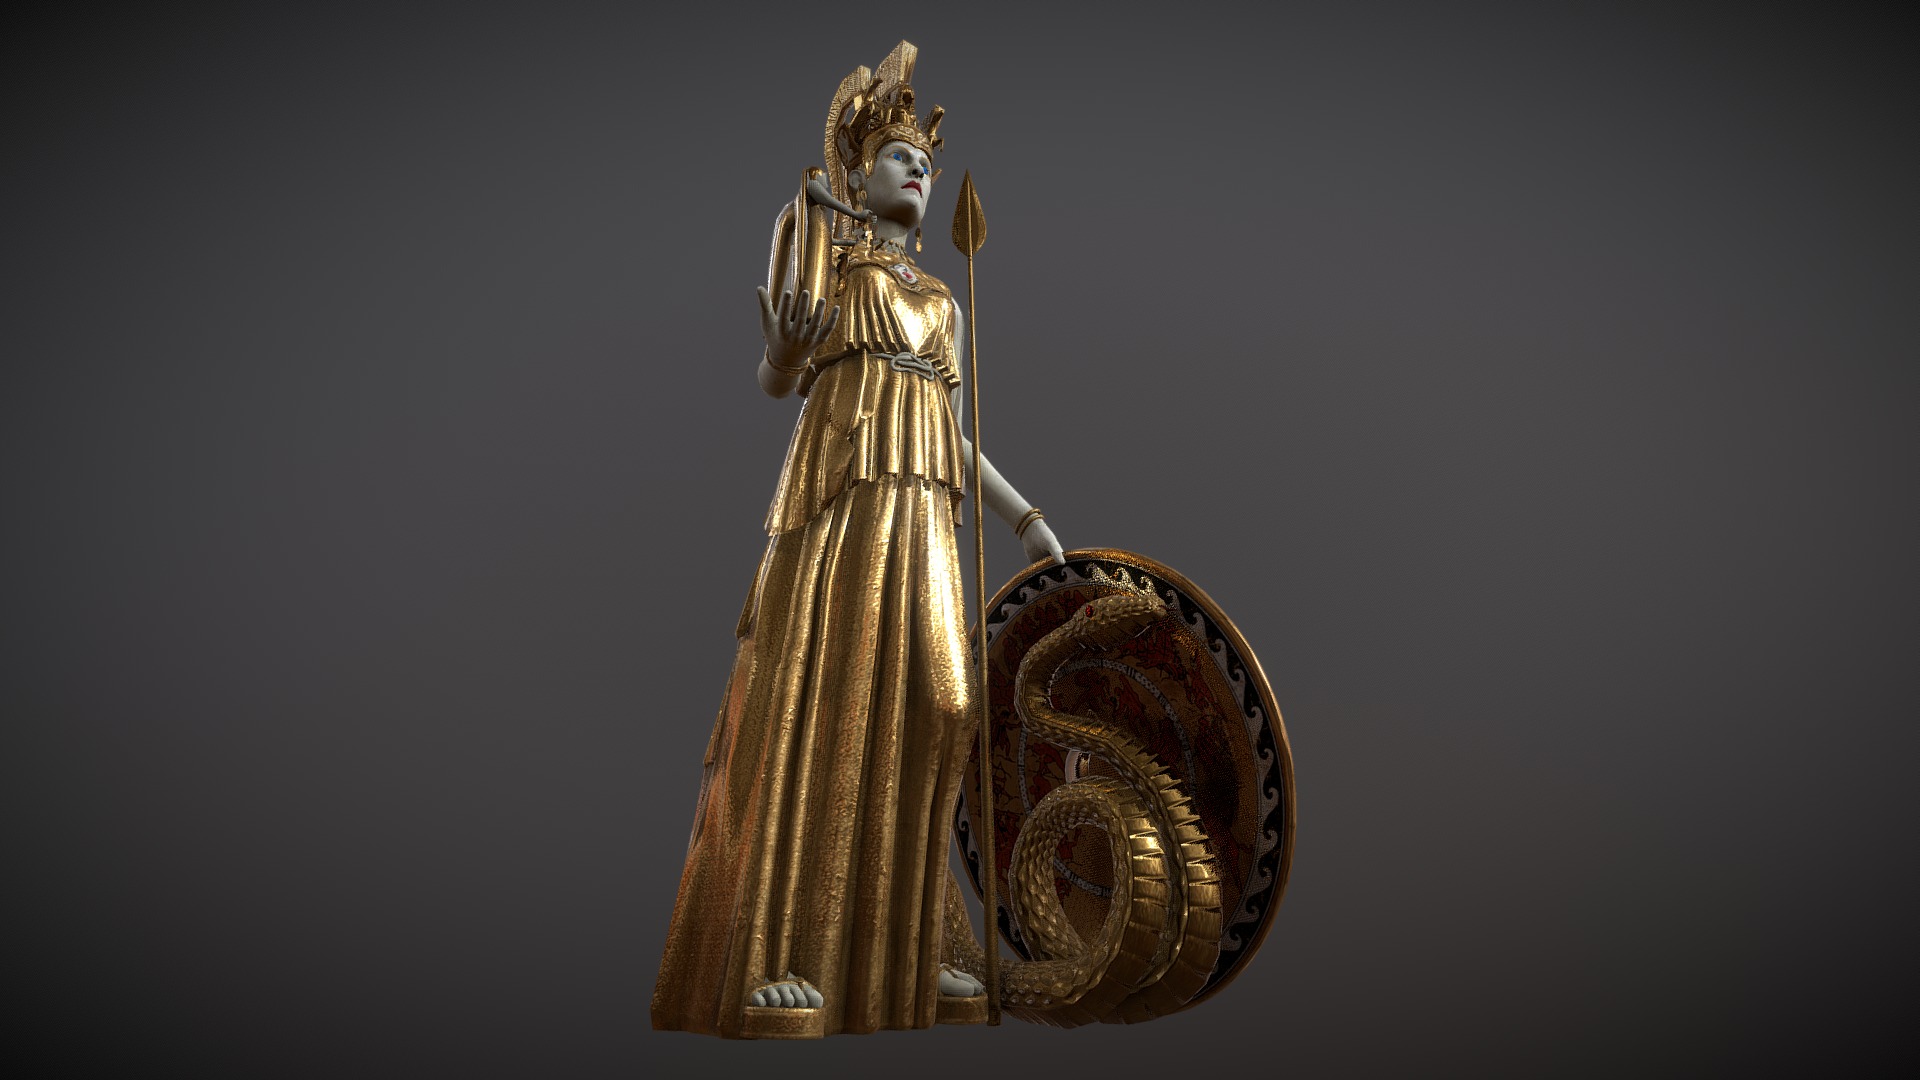 This is a model of Athena Parthenos from the Parthenon.  It is low poly with most of the fine detail included in Normal maps.

The original model of Athena and the snake was done by Kalani Strange  on a project we worked together on.  I reworked it for poly count and UV editing as well as painting the textures in Substance Painter.  I modeled and painted the shield 3d model